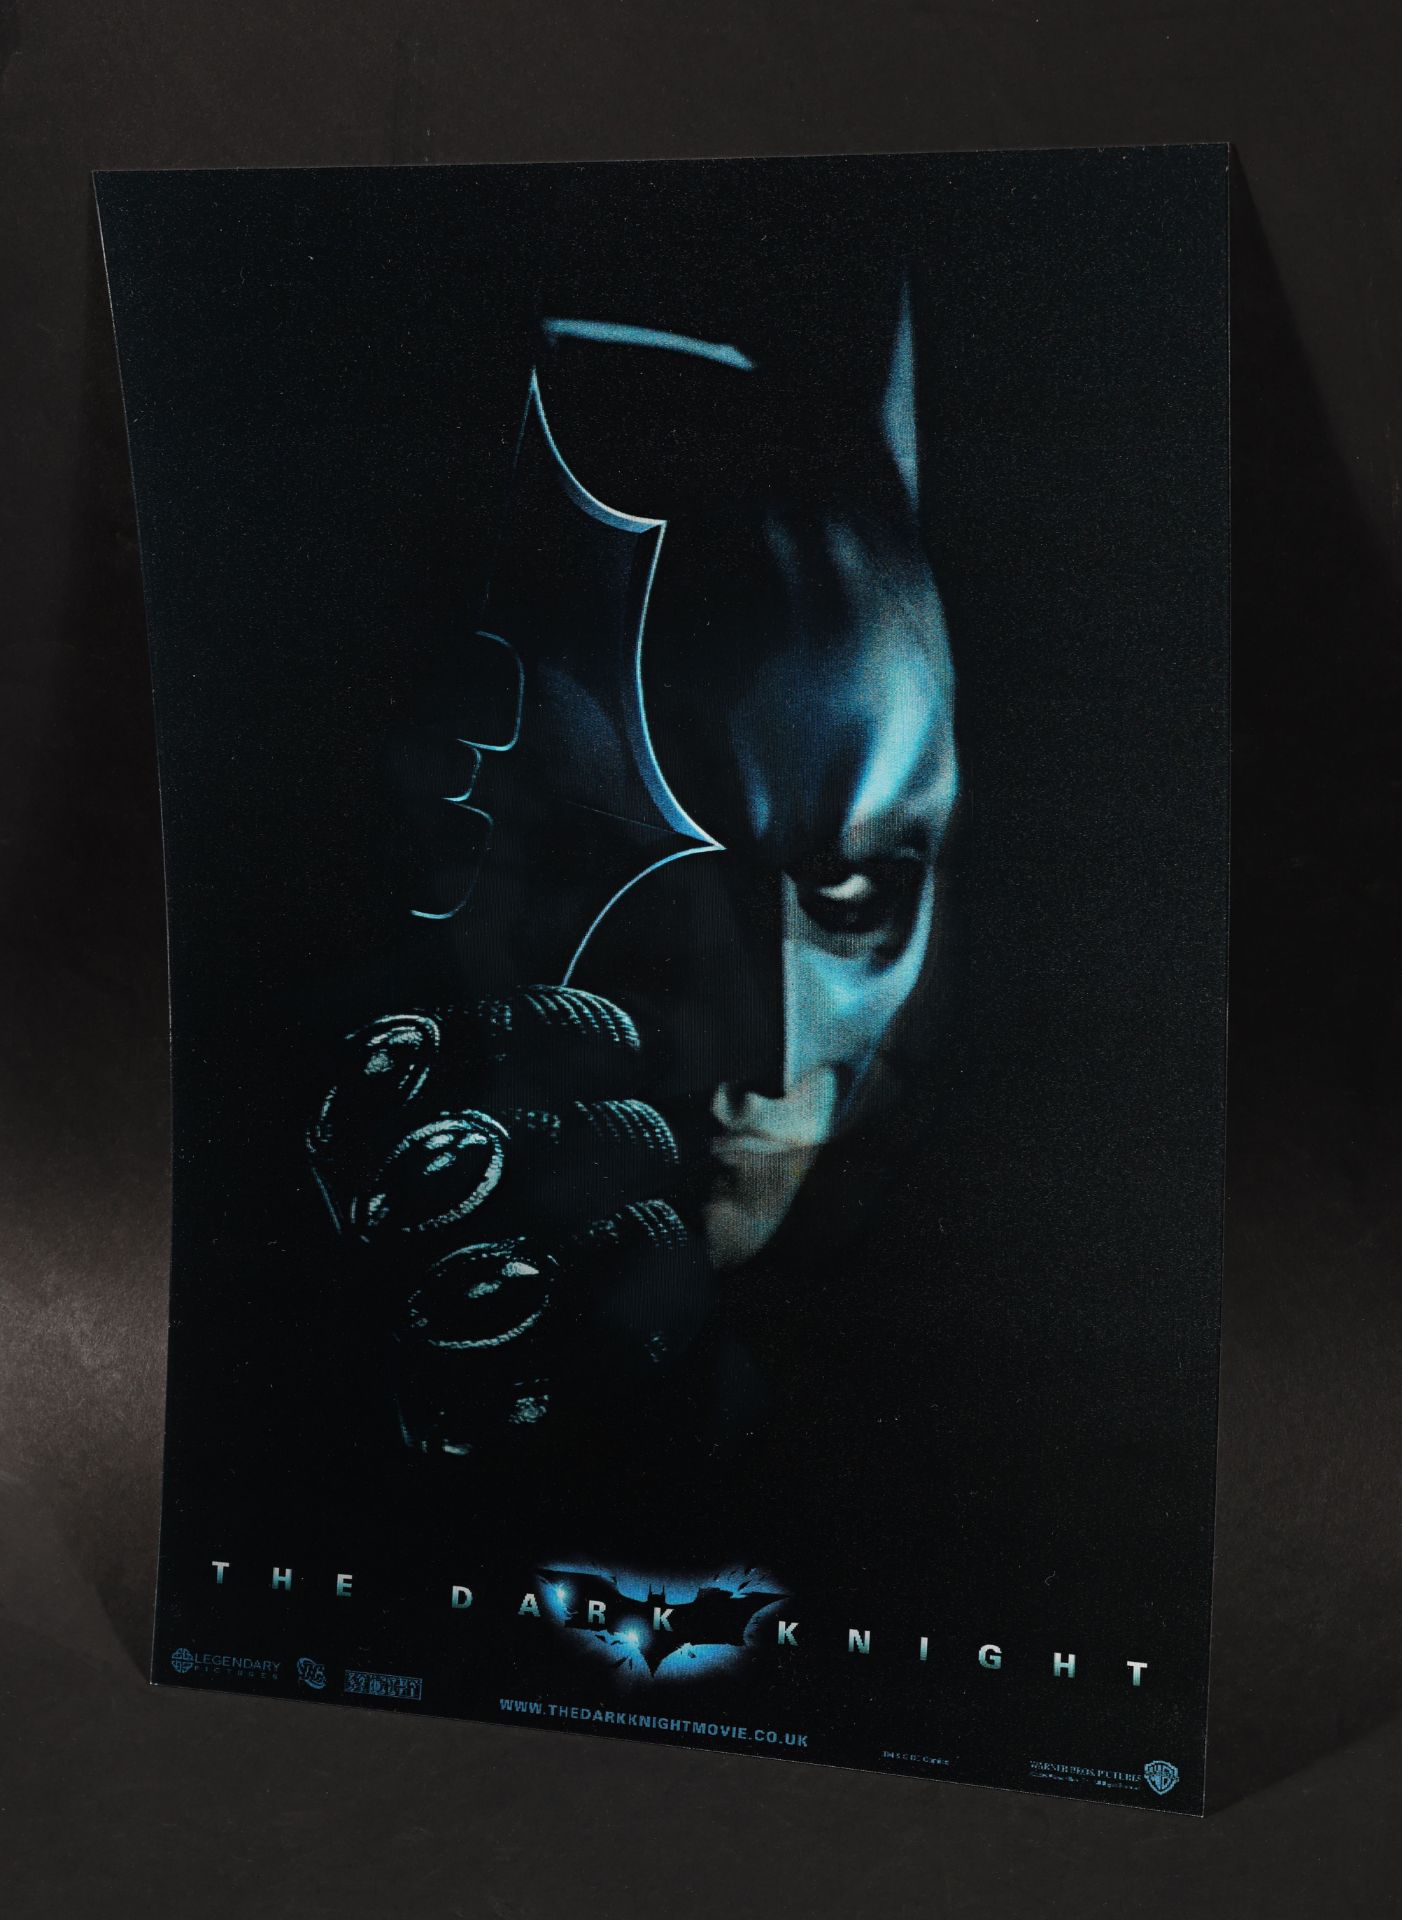 THE DARK KNIGHT (2008) - Special Poster - 3D Lenticular, 2008 - Image 3 of 3